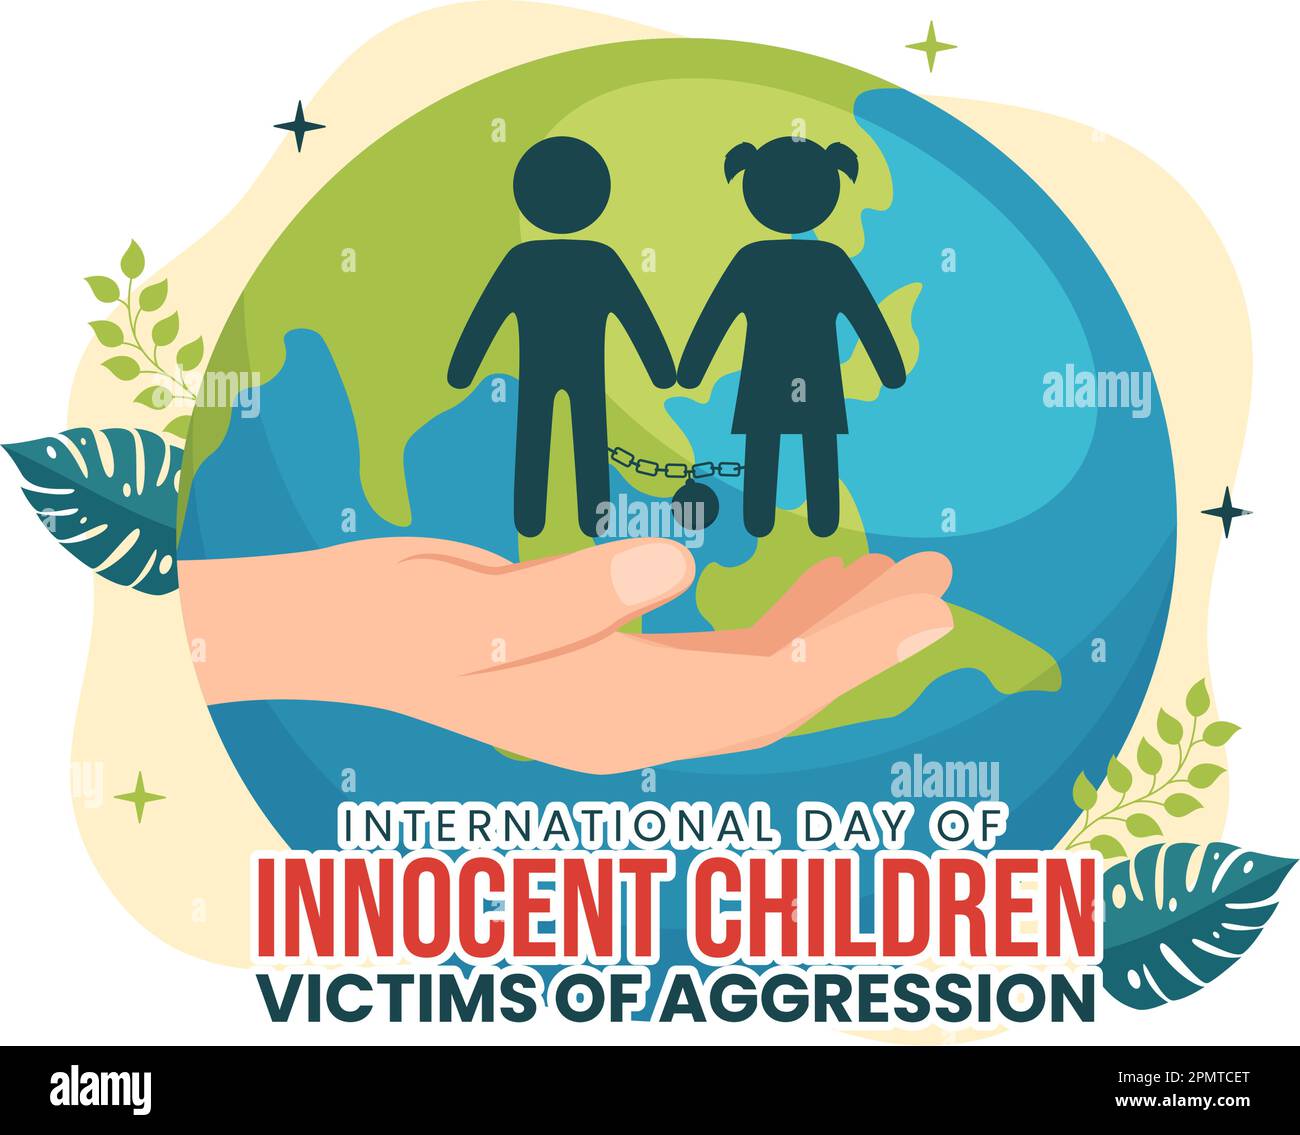 International Day of Innocent Children Victims of Aggression Vector Illustration with Kids Sad Pensive and Cries in Flat Cartoon Hand Drawn Templates Stock Vector